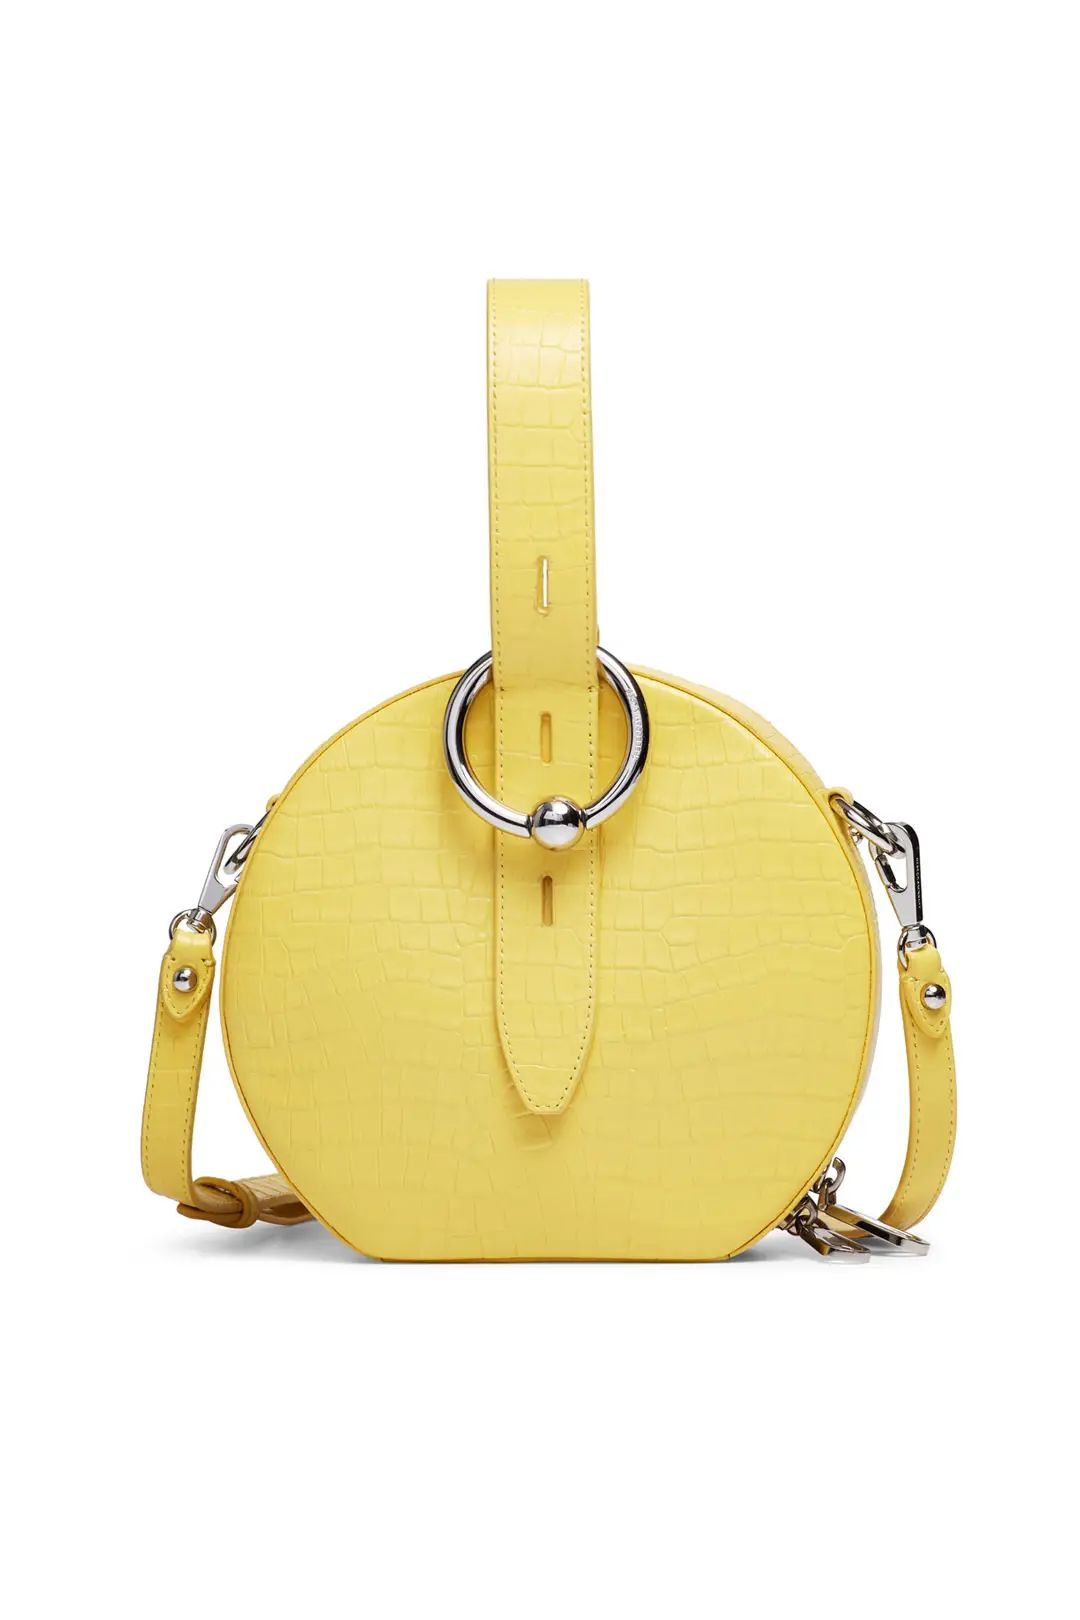 Rebecca Minkoff Accessories Yellow Kate Circle Bag | Rent The Runway